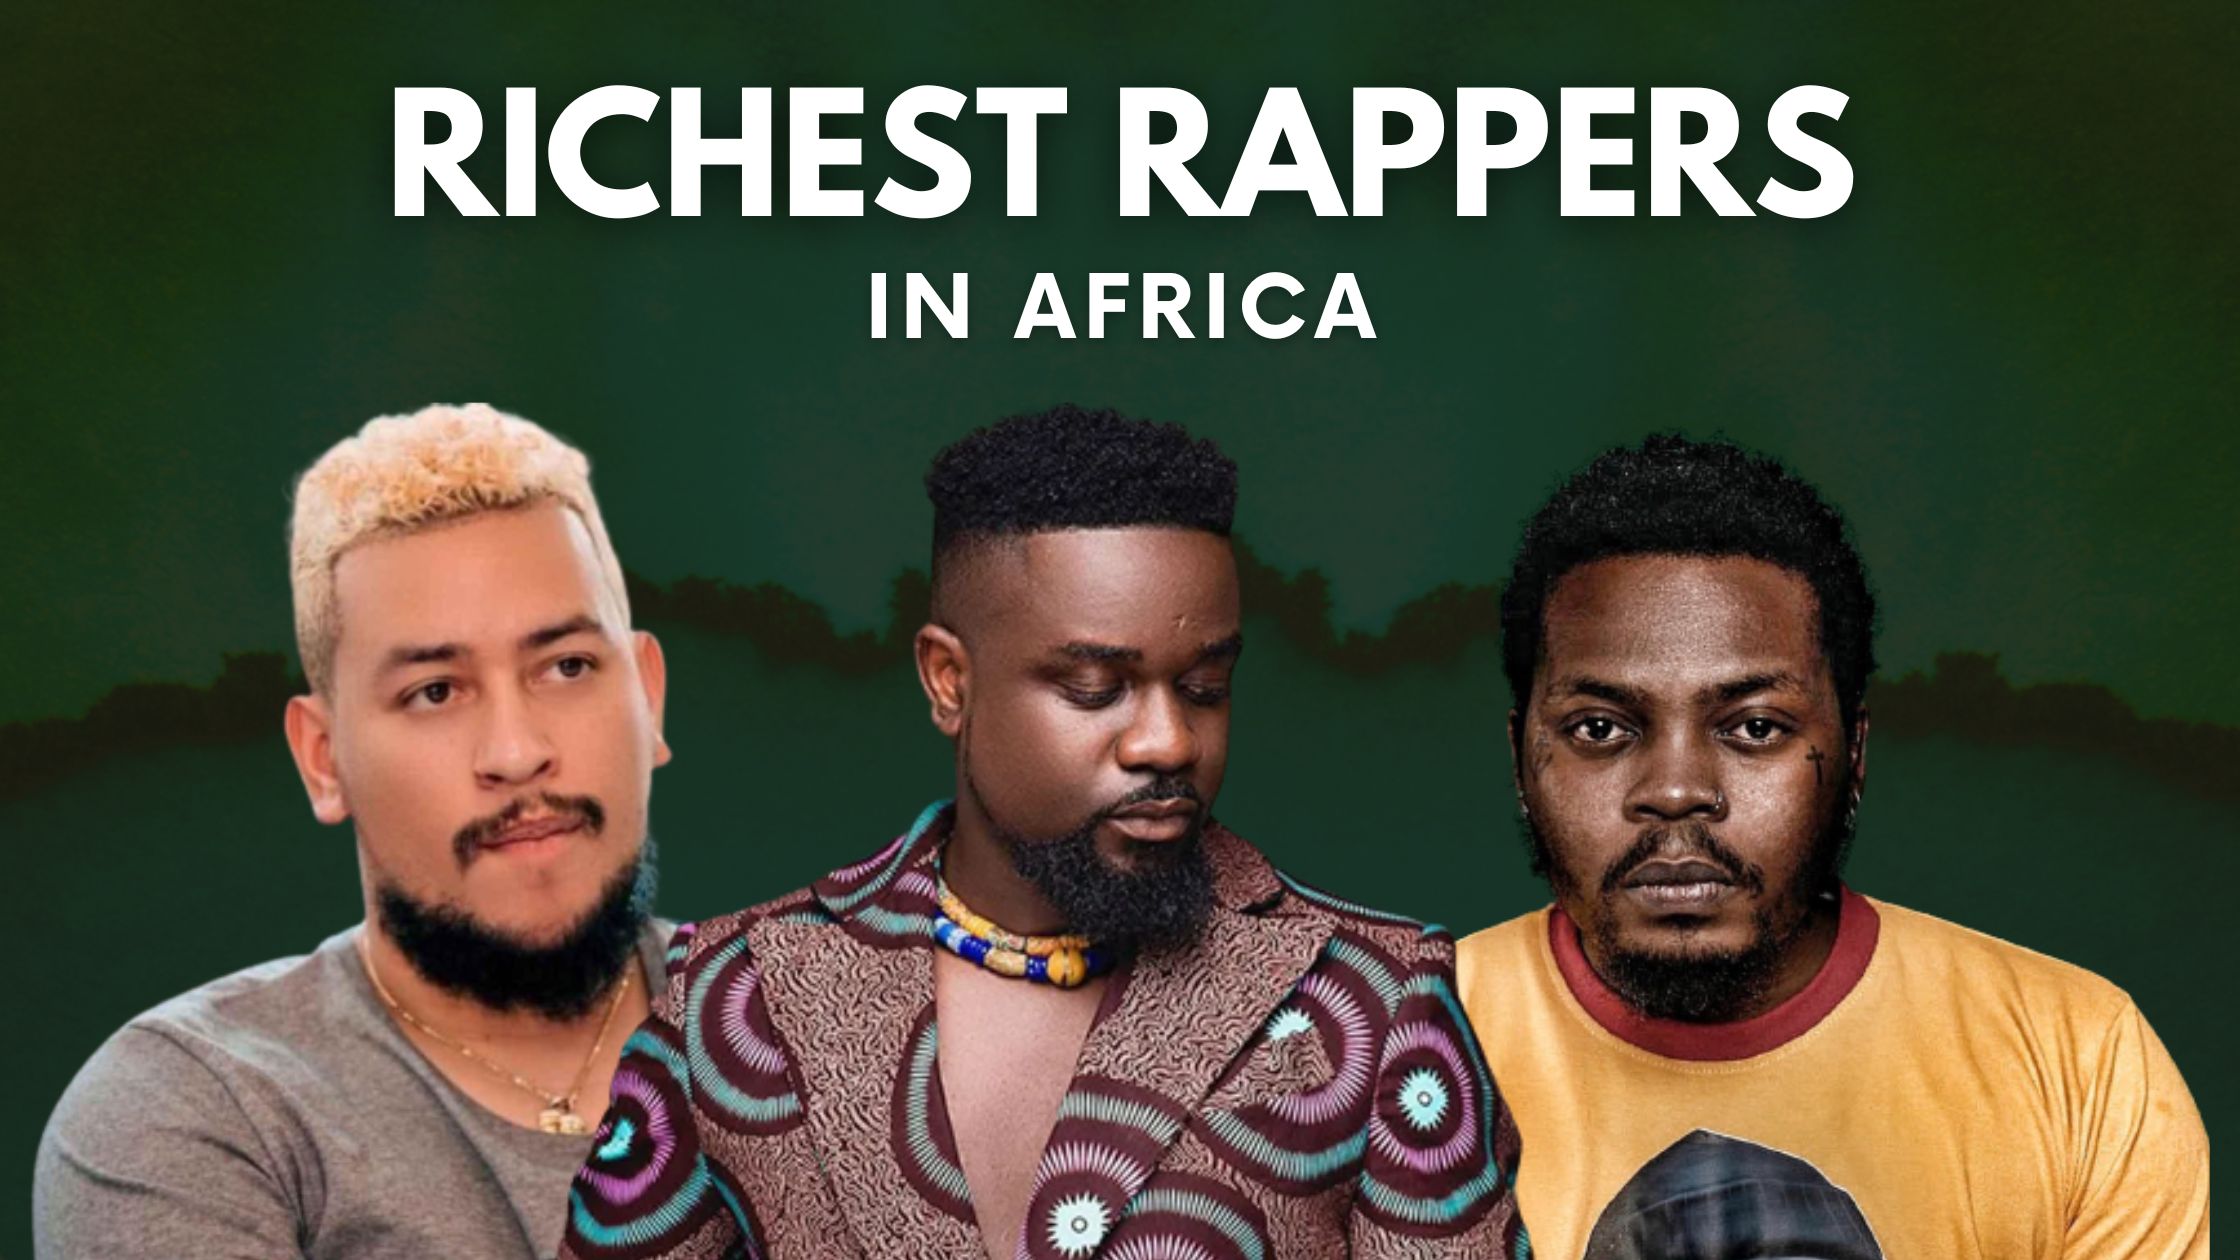 Top 10 Richest Rappers In Africa 2022